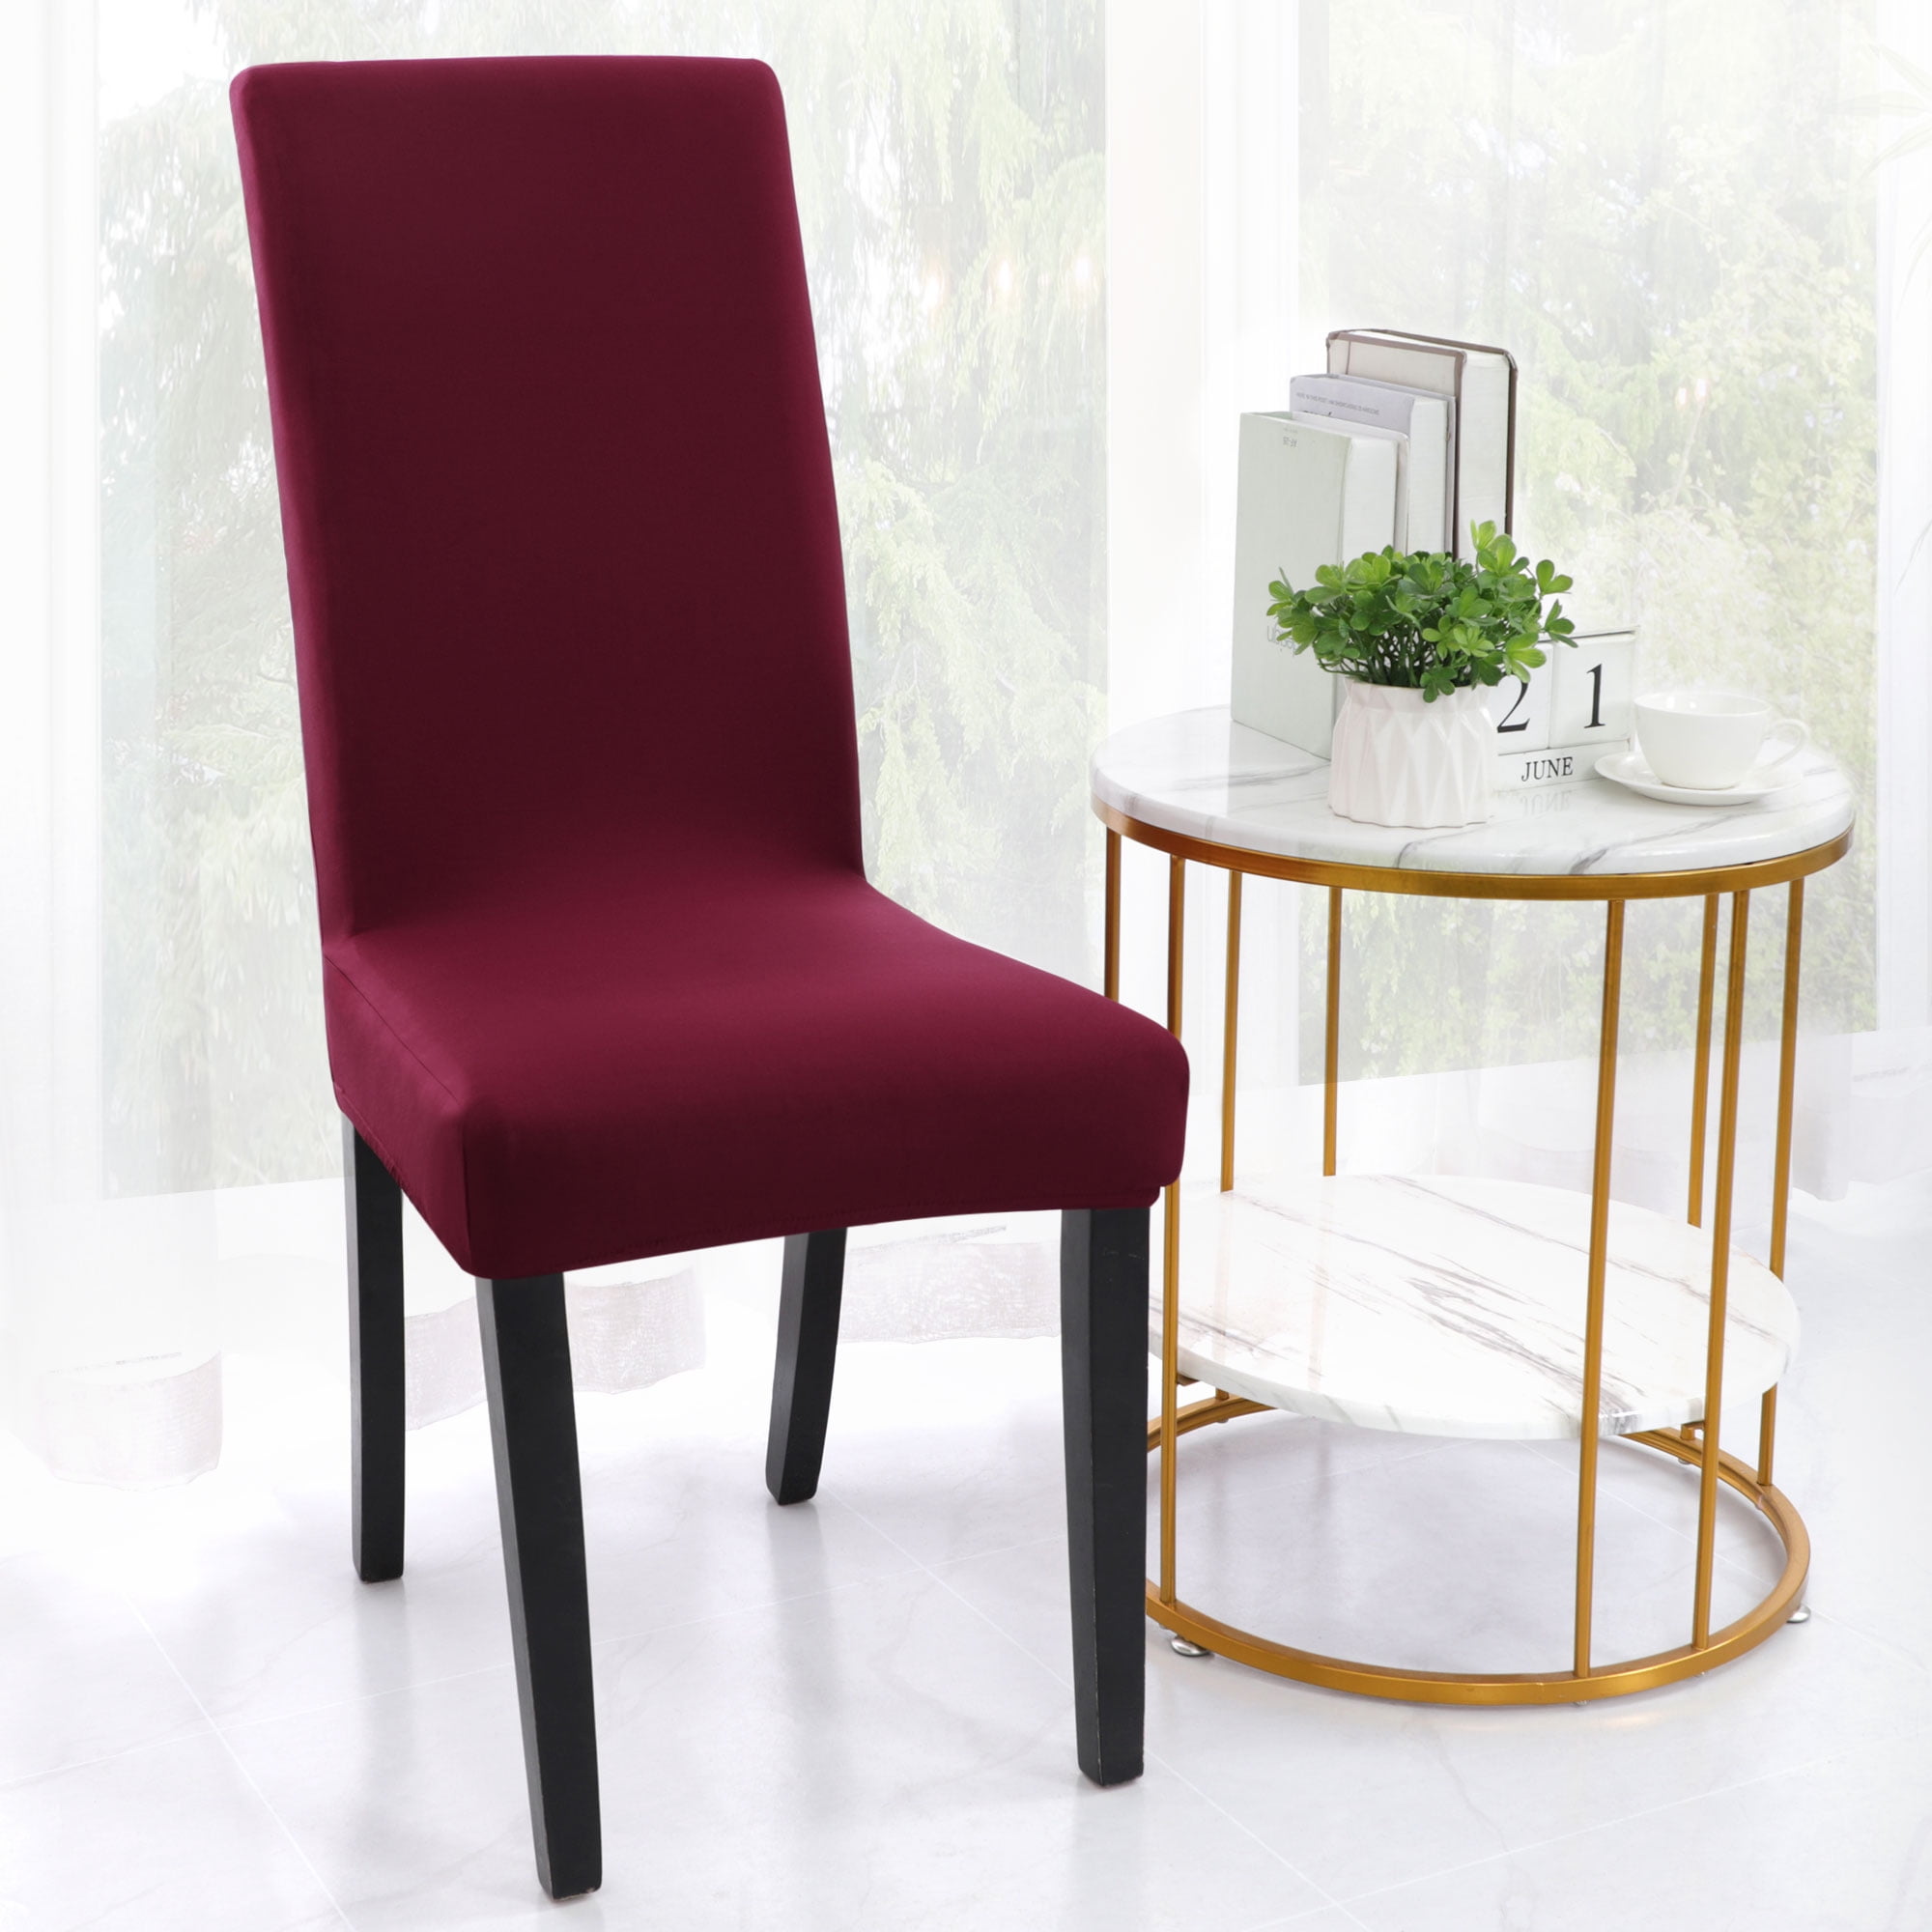 Details about   Colour Thickened Elastic Chair Seat Cover Dining Wedding Banquet Decor JA 